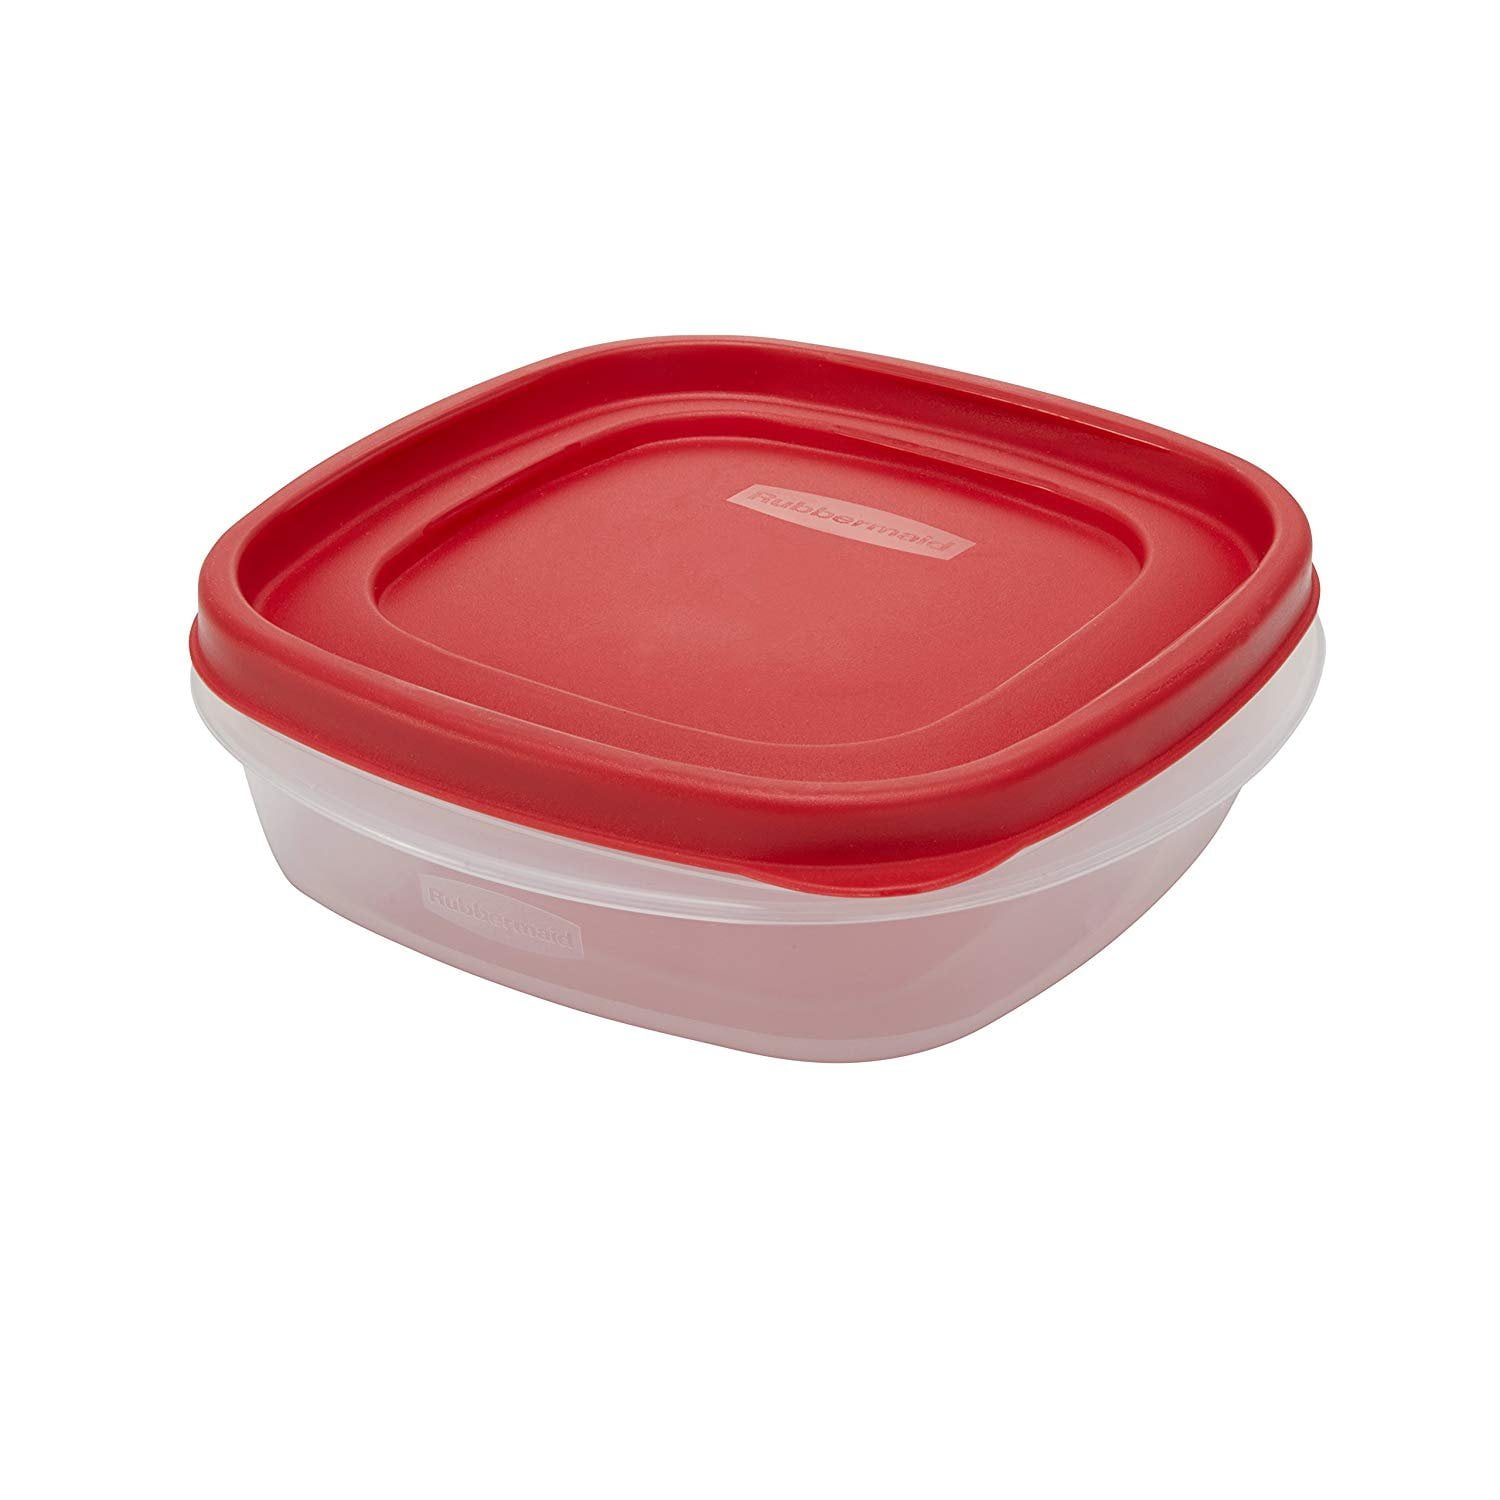 Rubbermaid Rubbermaid 832343 3 Cup Square Food Container at